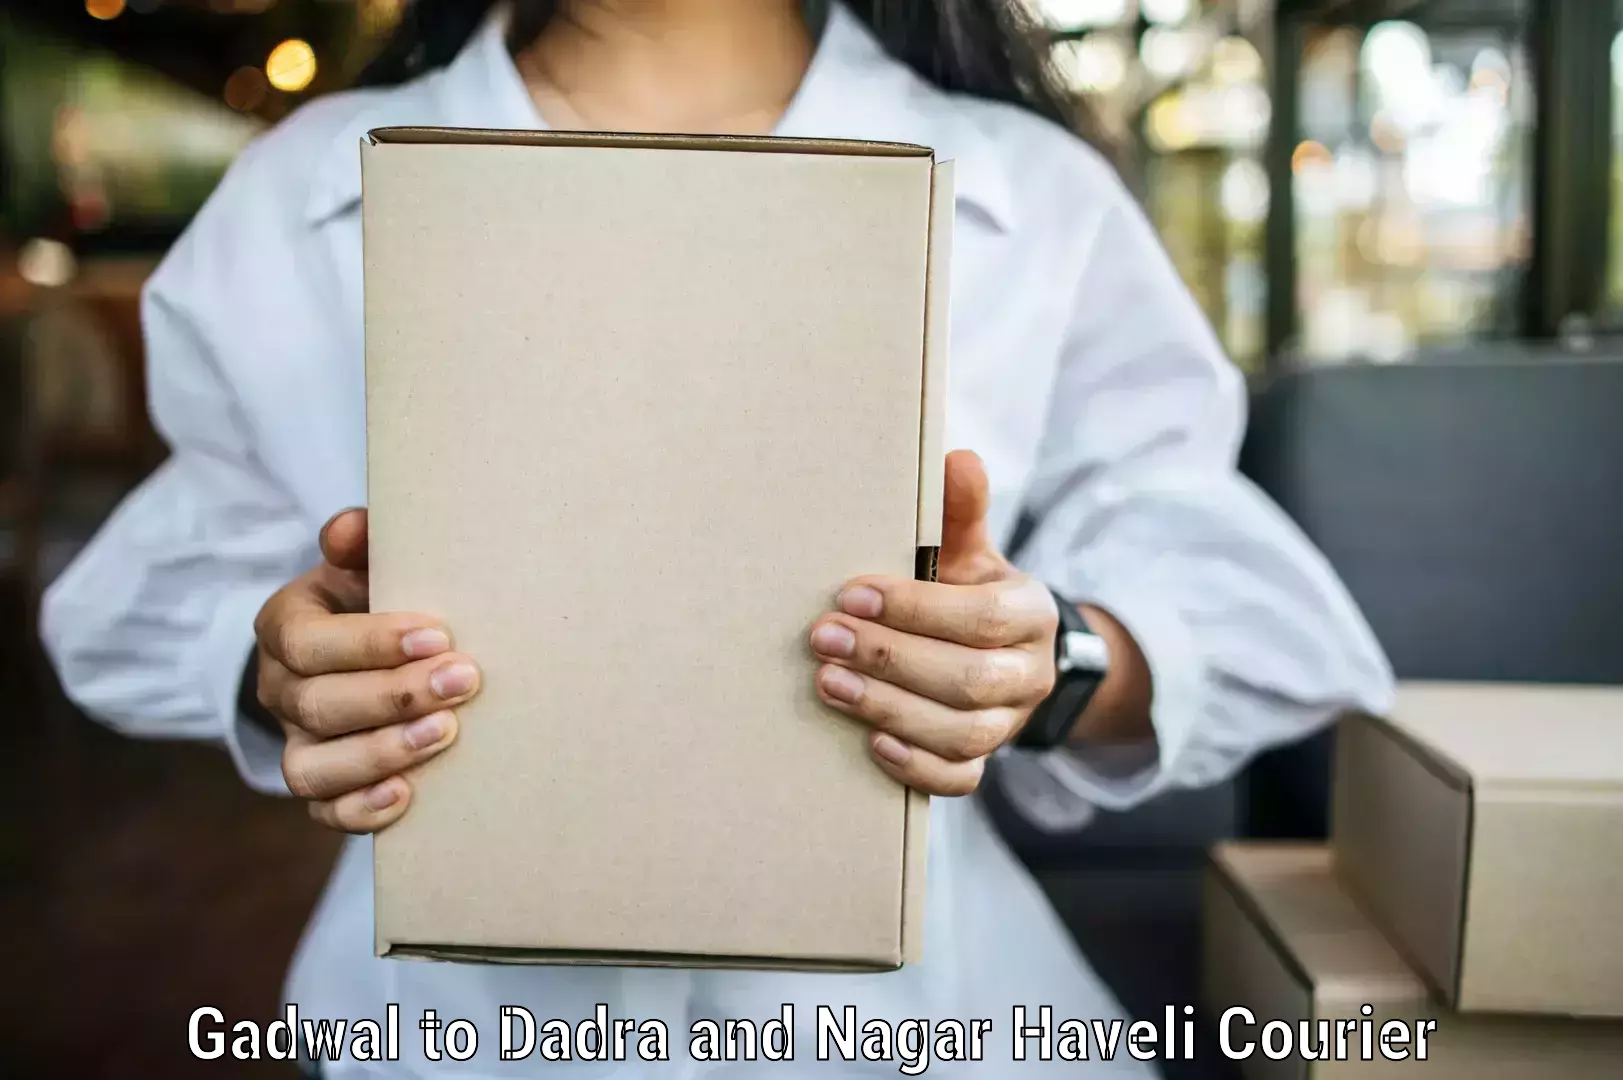 Professional courier handling in Gadwal to Dadra and Nagar Haveli